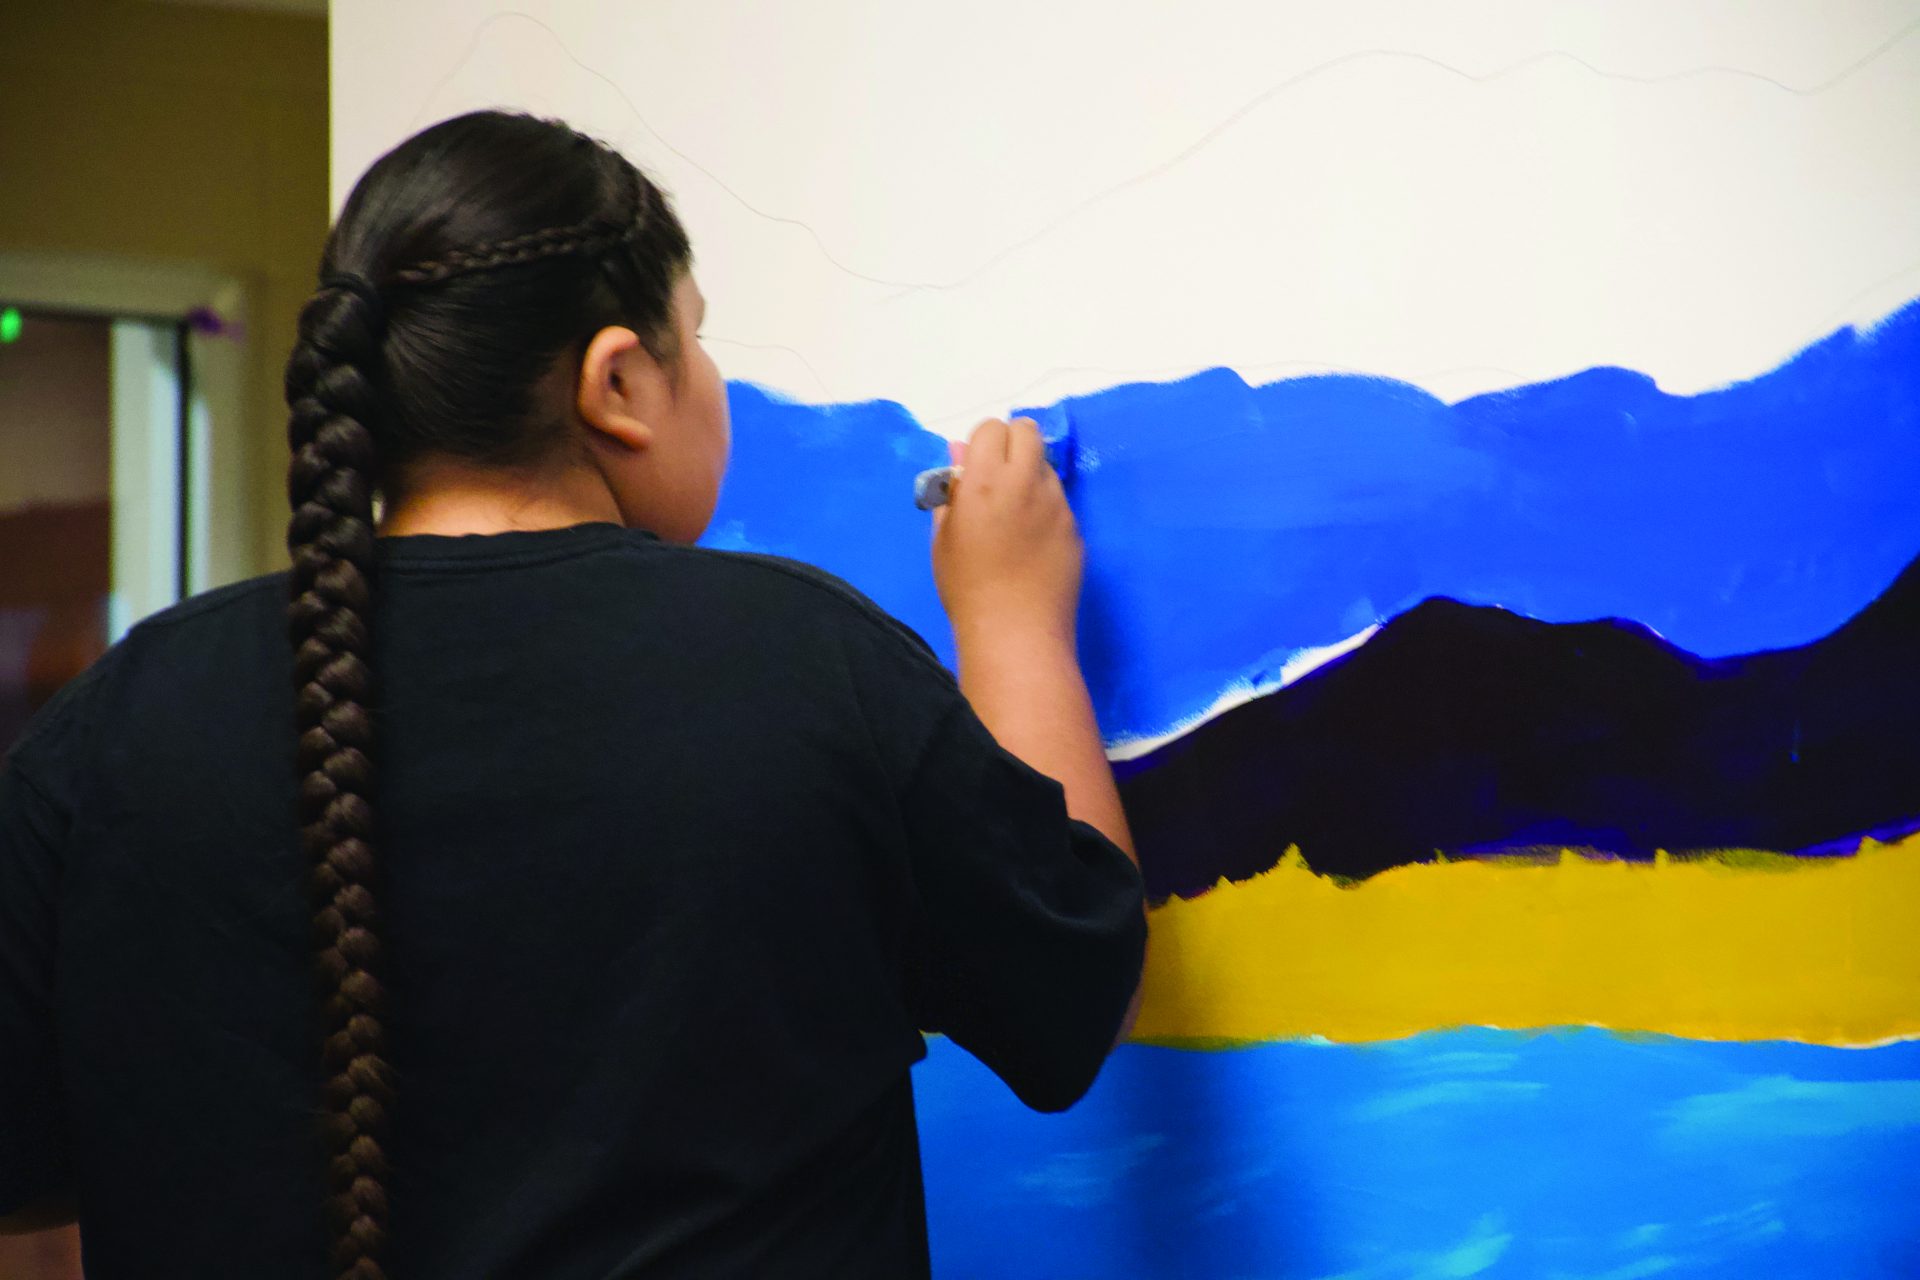 Boys & Girls Club Youth at WOLF Paint New Mural